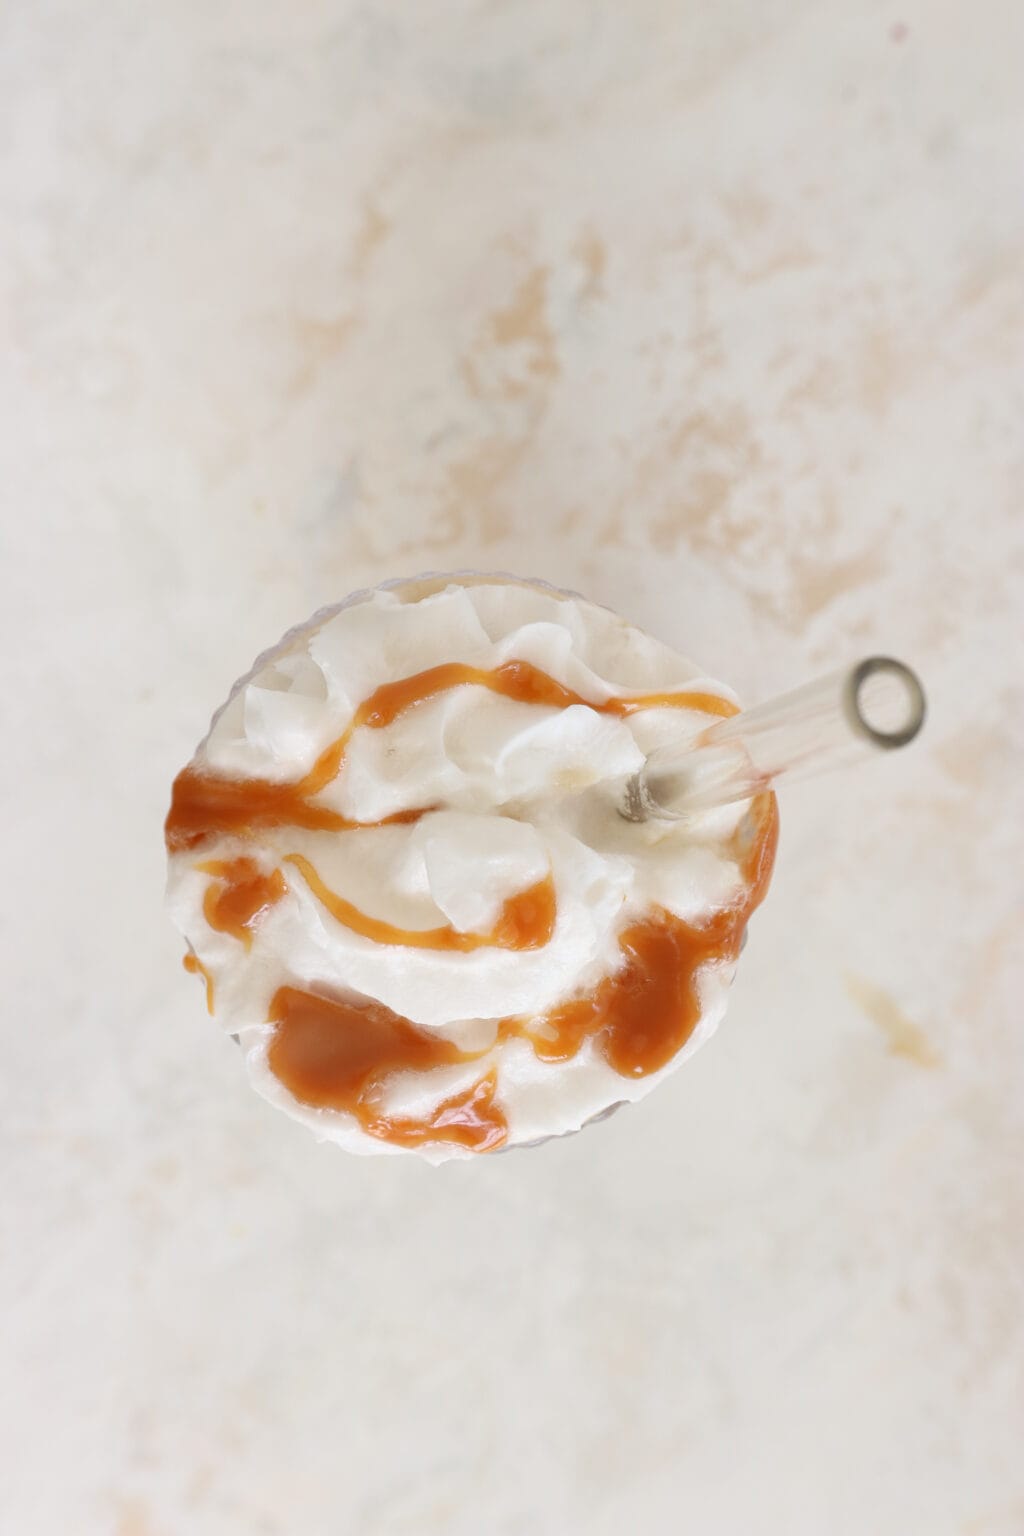 Whipped cream with caramel drizzle.